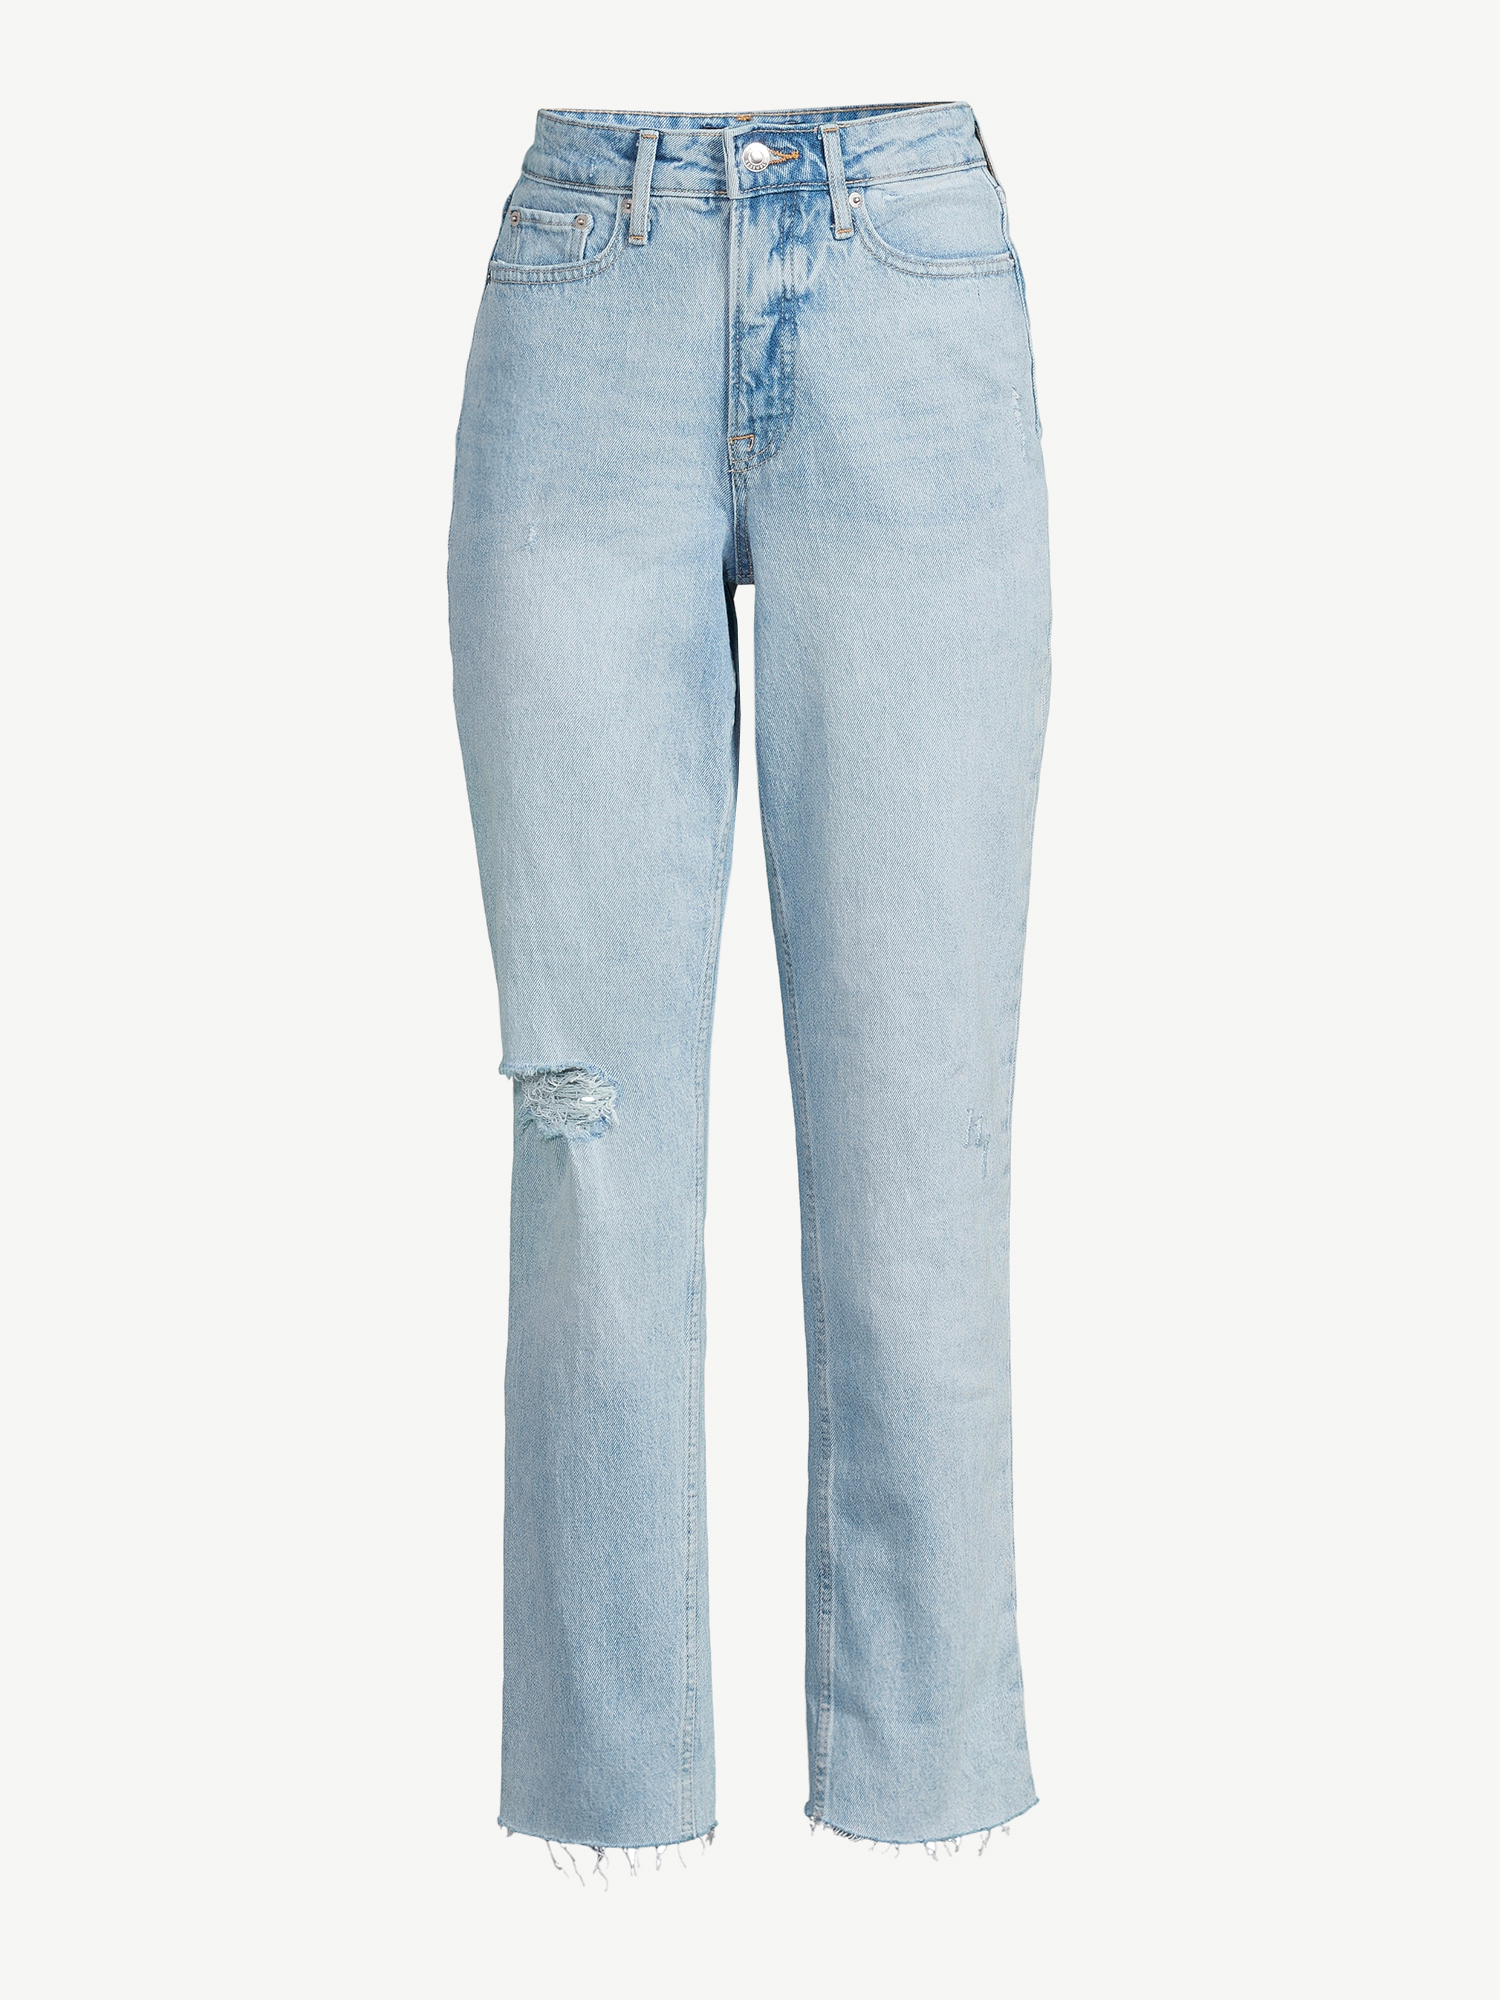 Free Assembly Women's Super High Rise Straight Jeans - image 4 of 6